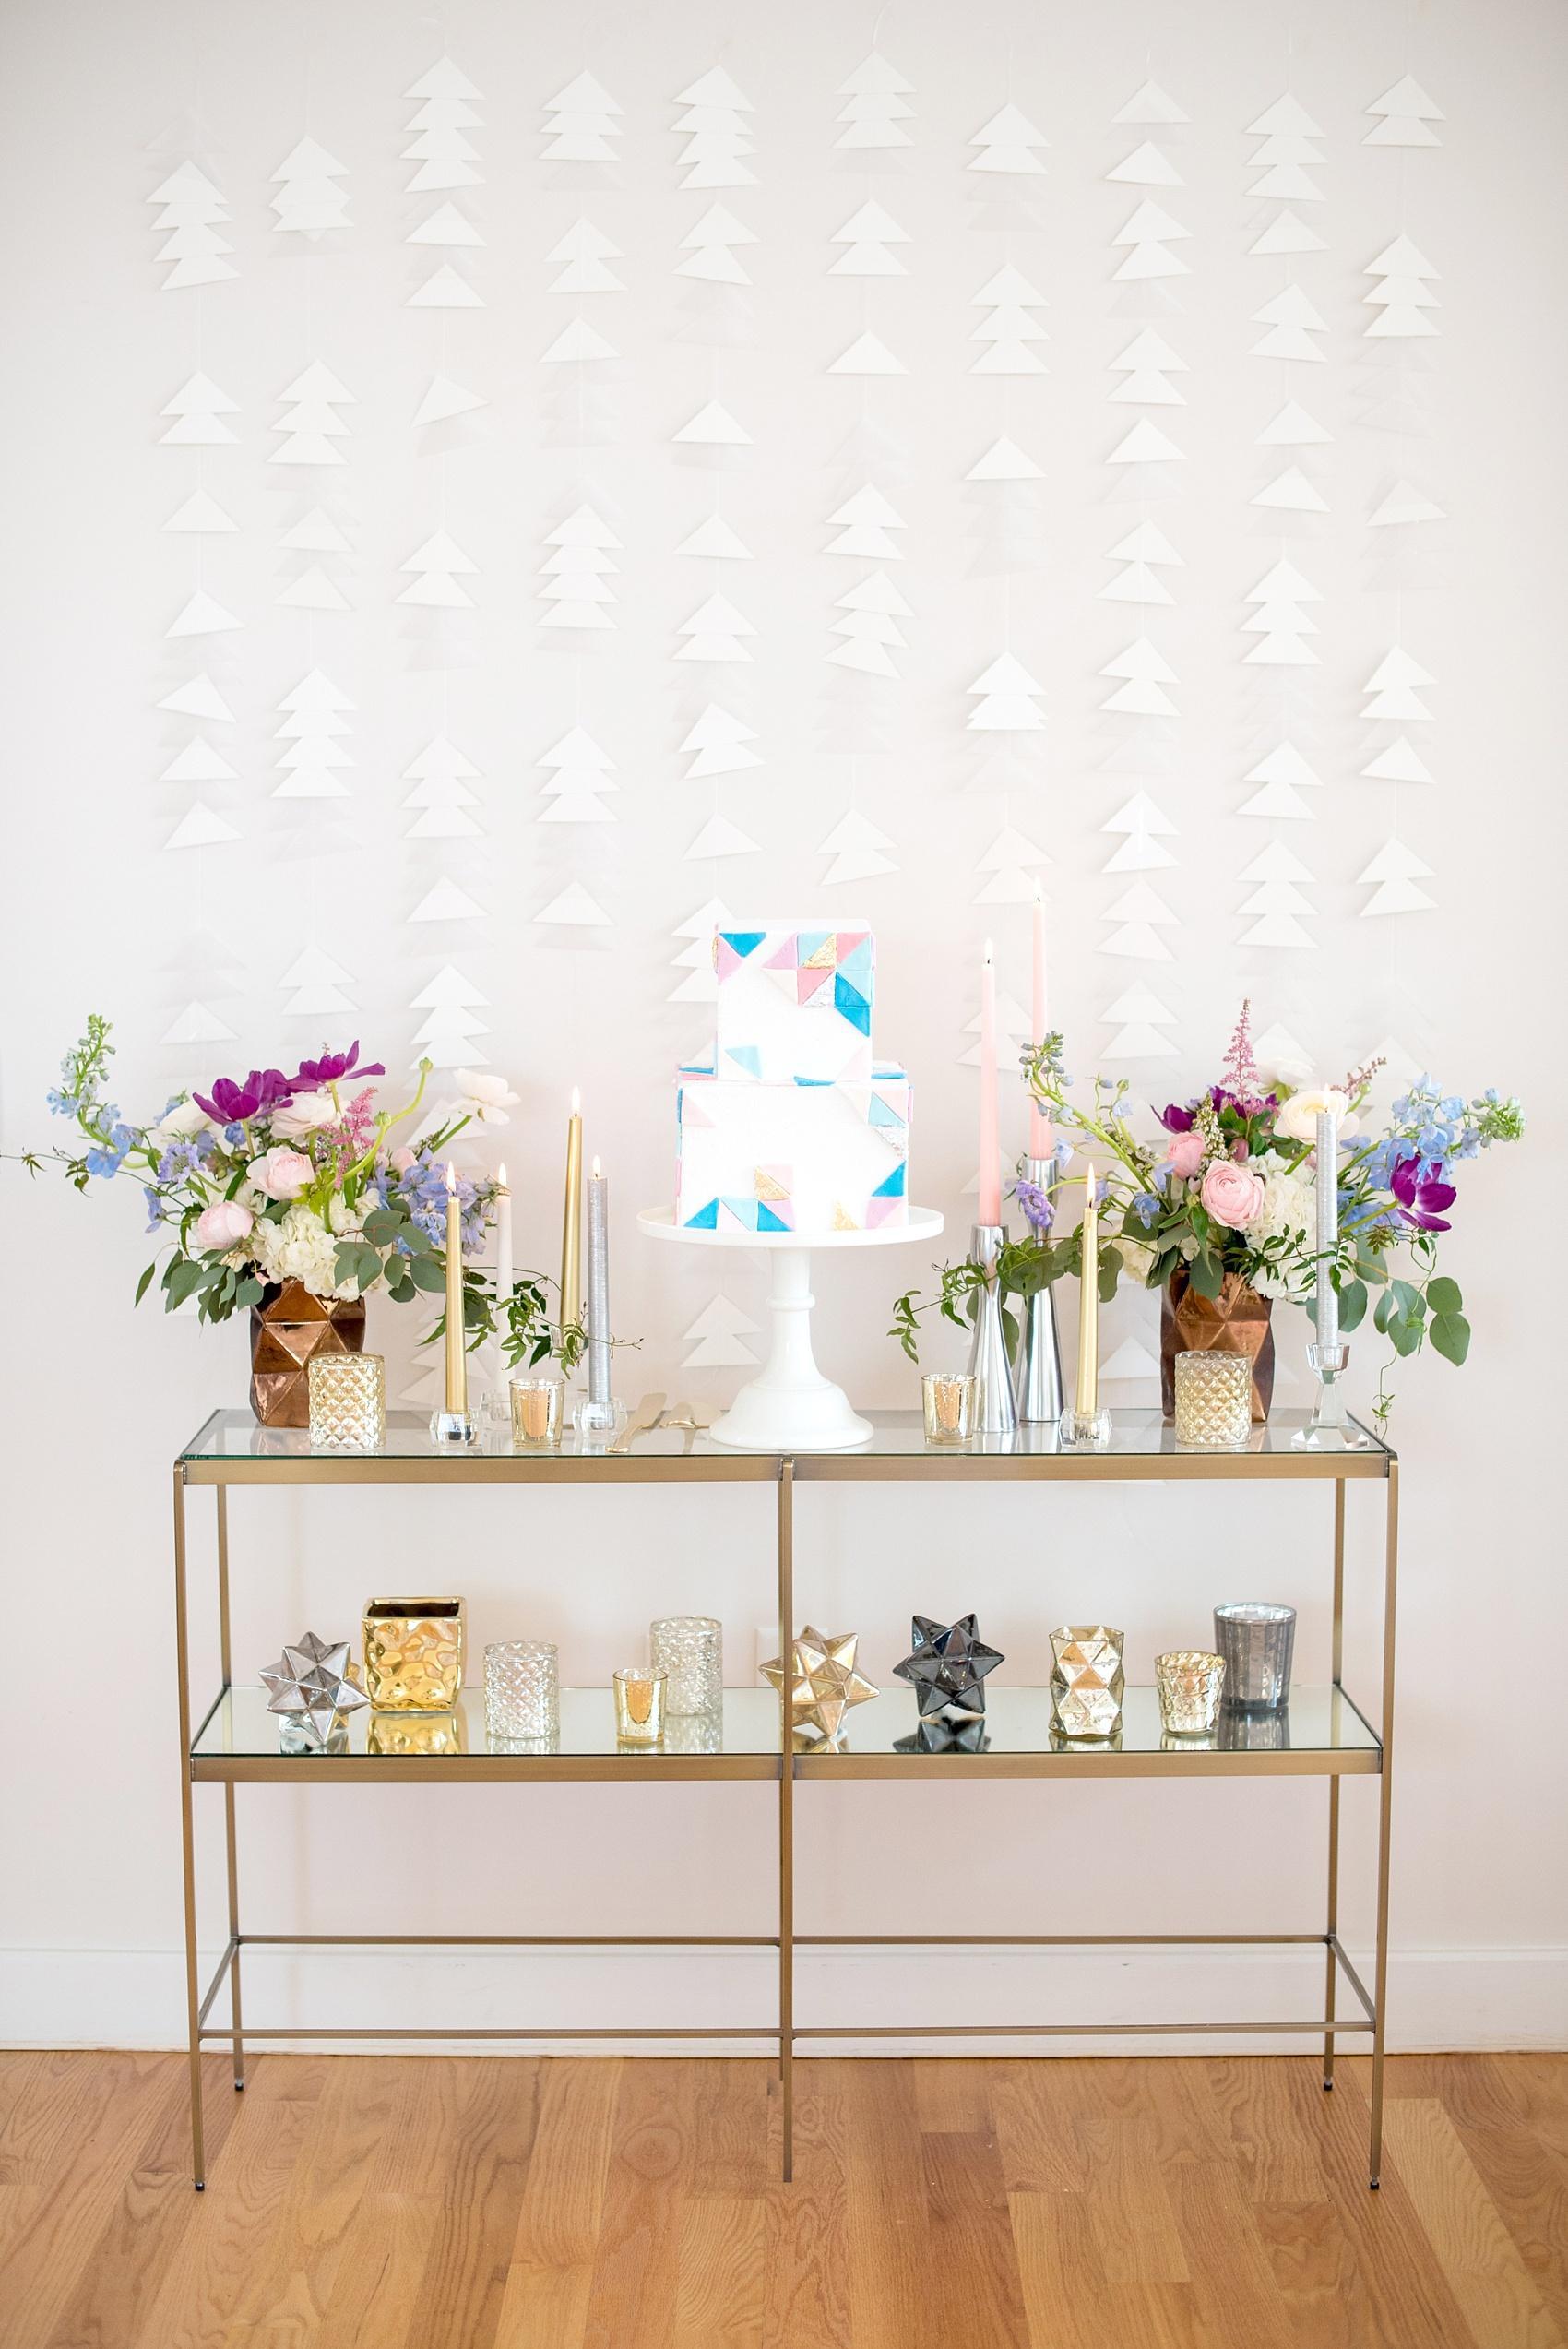 The Glass Box at 230 wedding photos by Mikkel Paige Photography. Serenity blue and Rose Quartz pink inspiration. Paper by Bella Joviality styling by Glitter Inc., flowers by Eclectic Sage and cake by Sugar Euphoria.